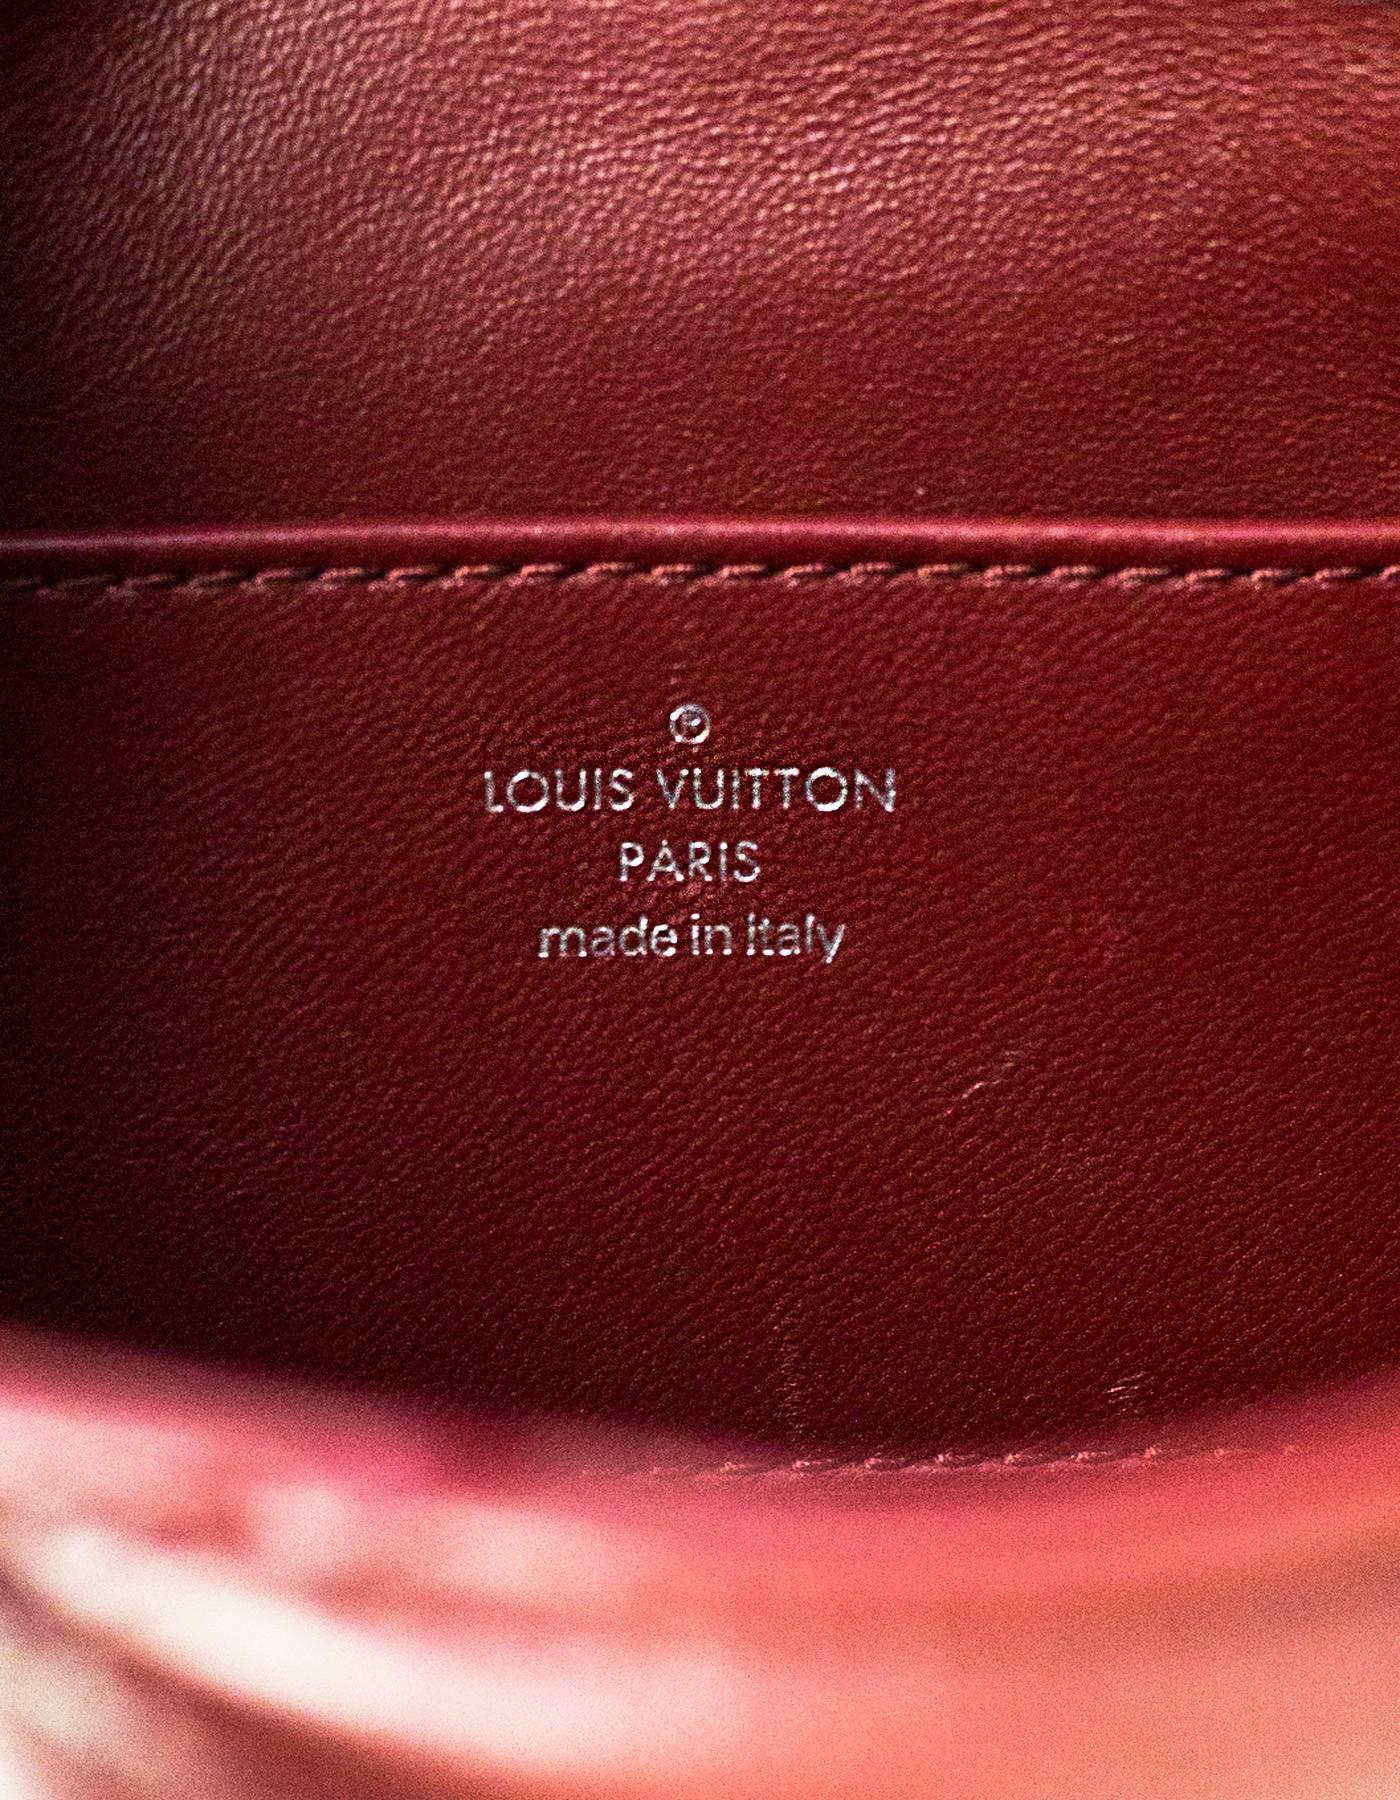 Women's Louis Vuitton Burgundy Leather GO-14 Malletage PM Quilted Twist Bag rt. $3950